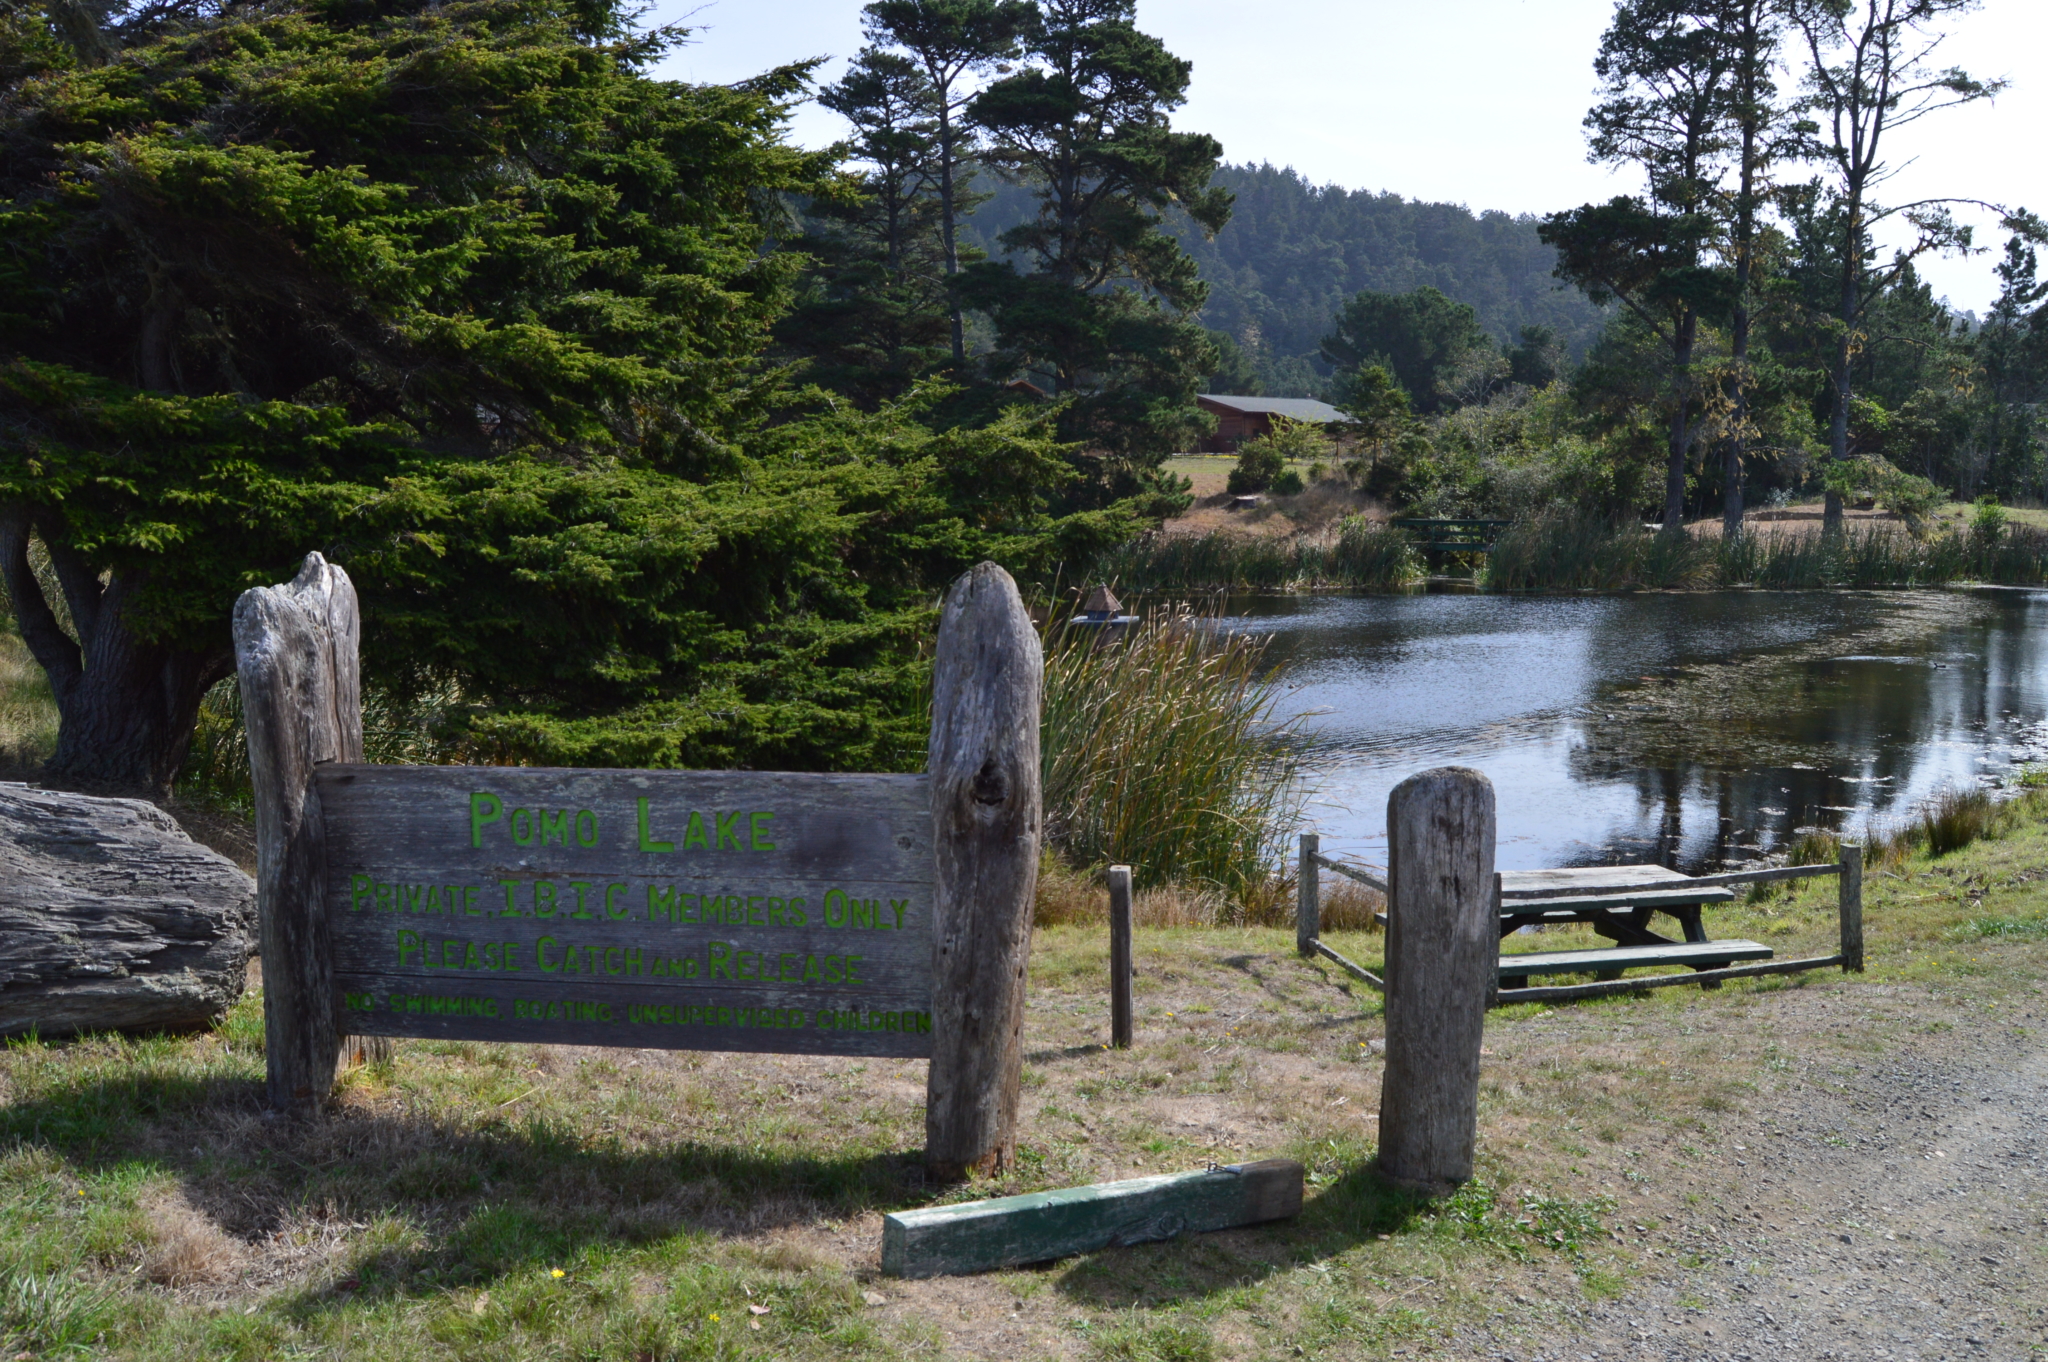 Wooden picnic table and sign near small lake surrounded by trees.